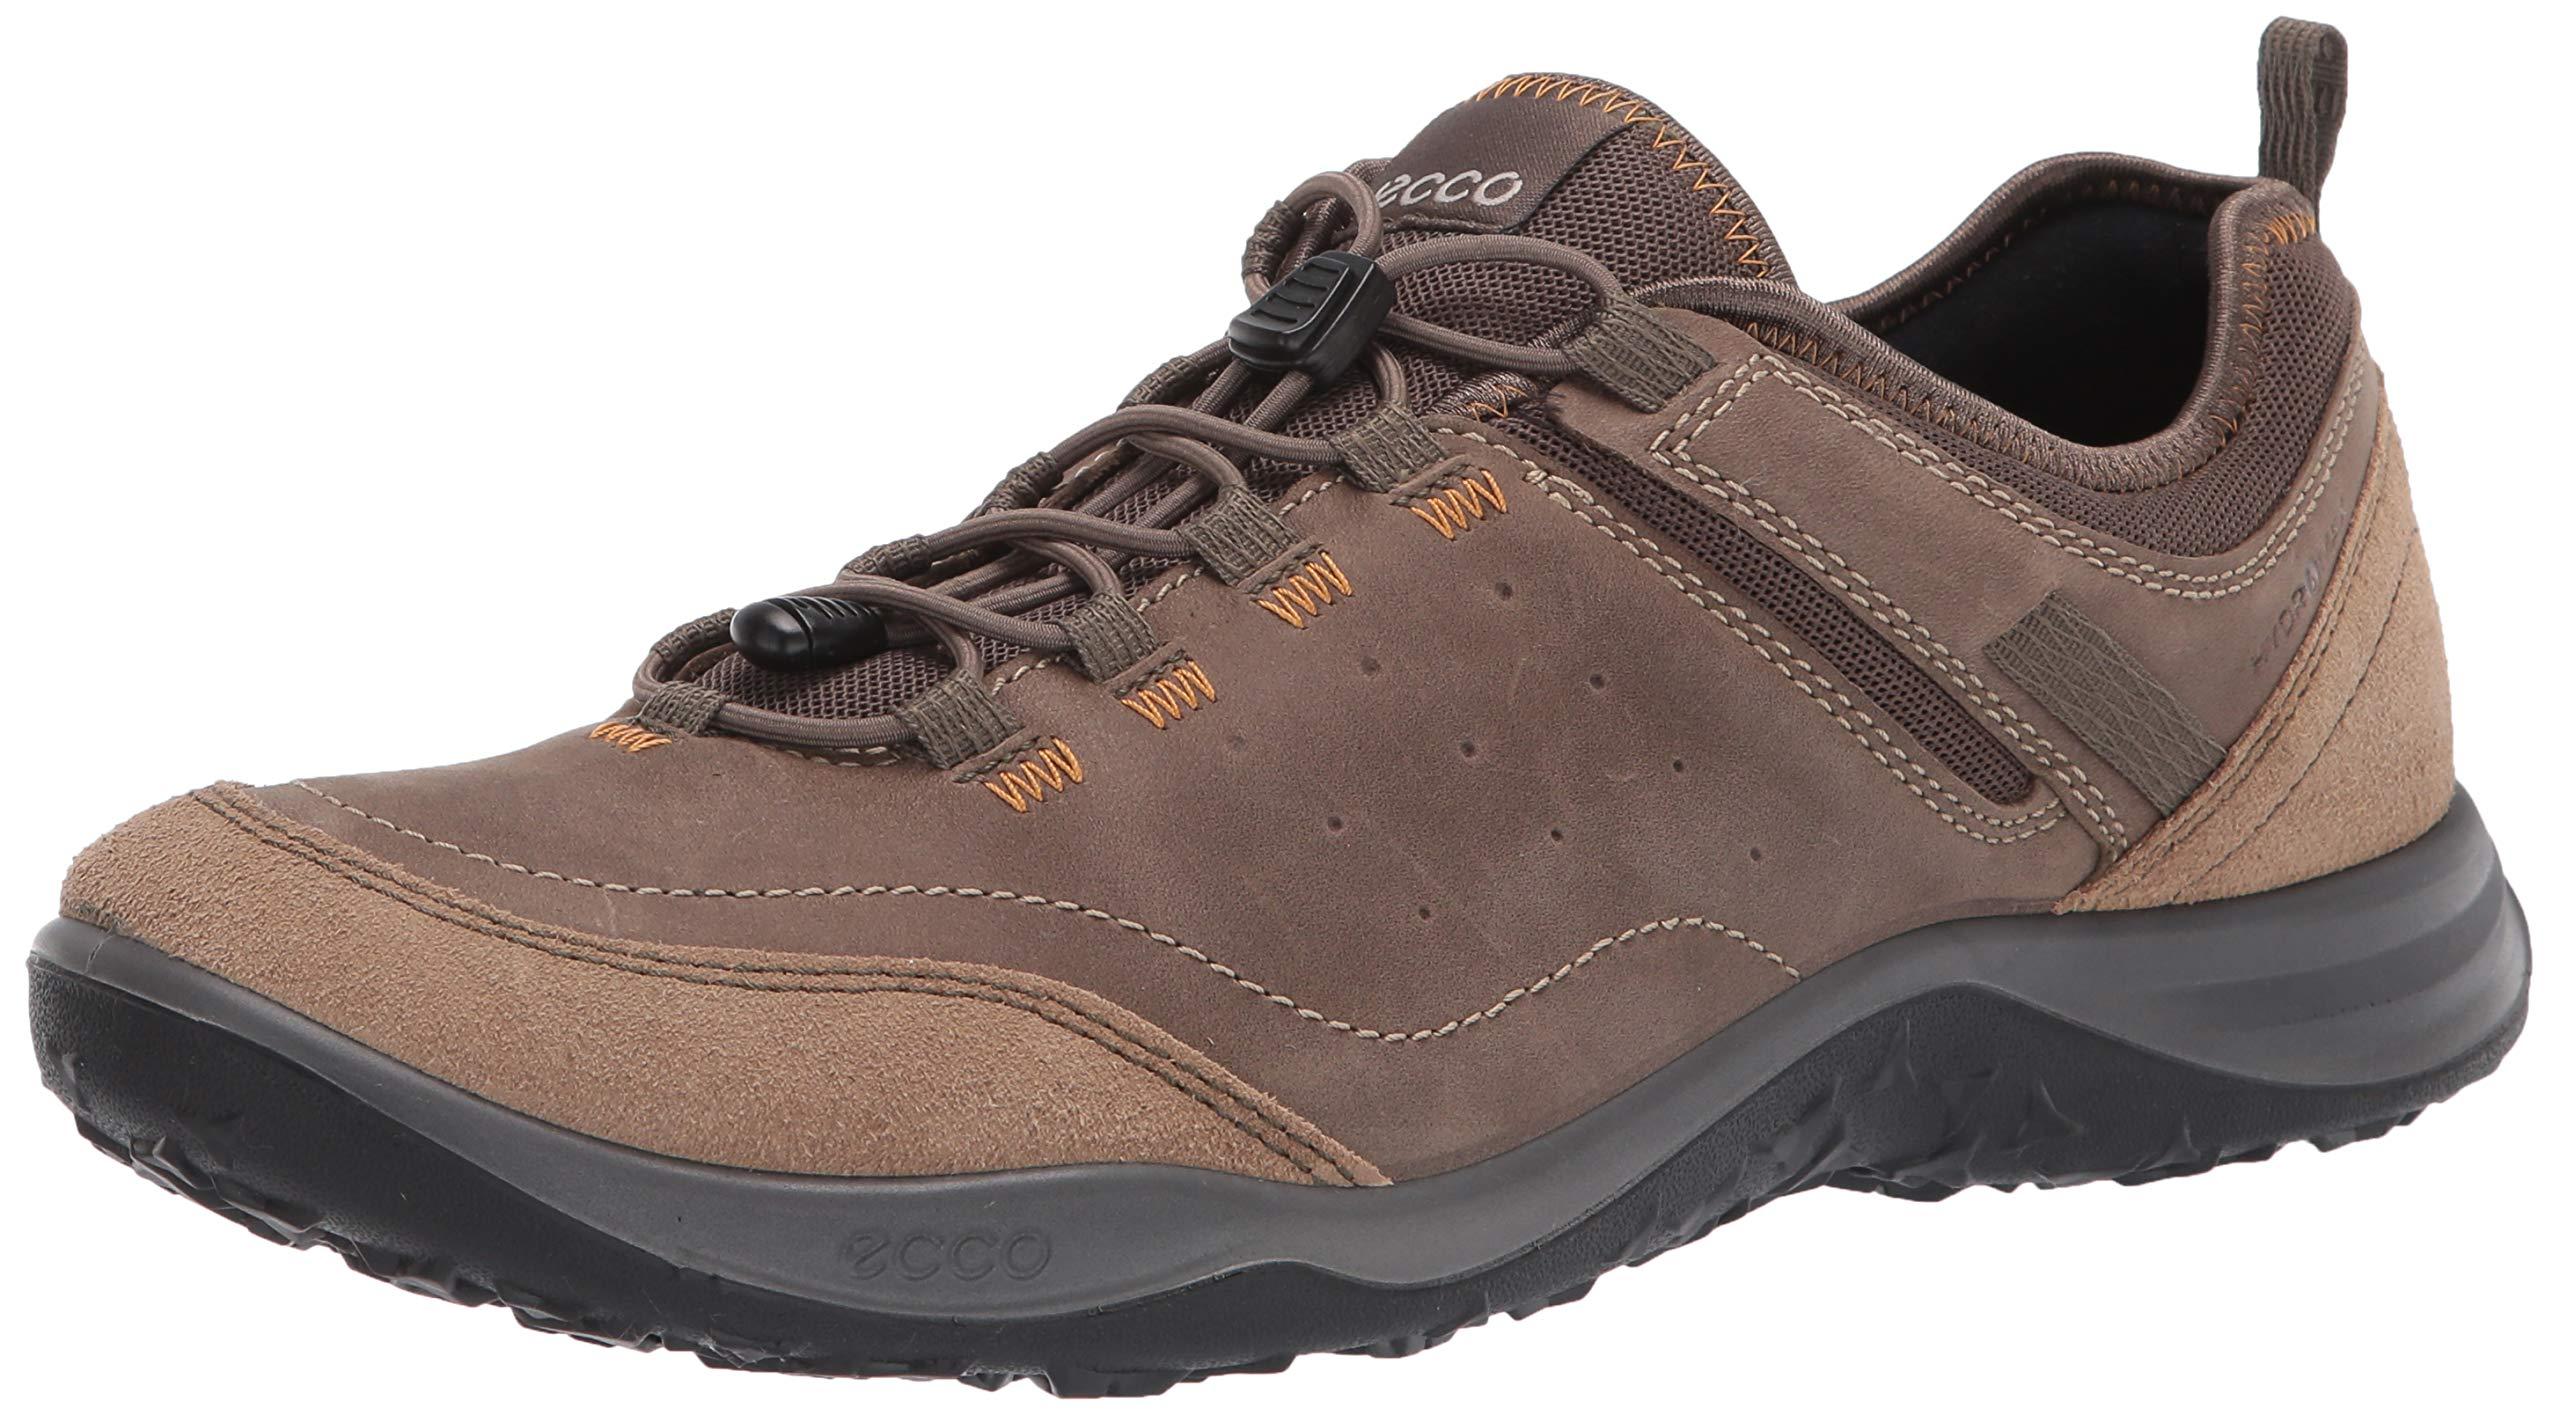 Ecco Espinho Speed Lace Hydromax Hiking Shoe in Brown for Men - Lyst